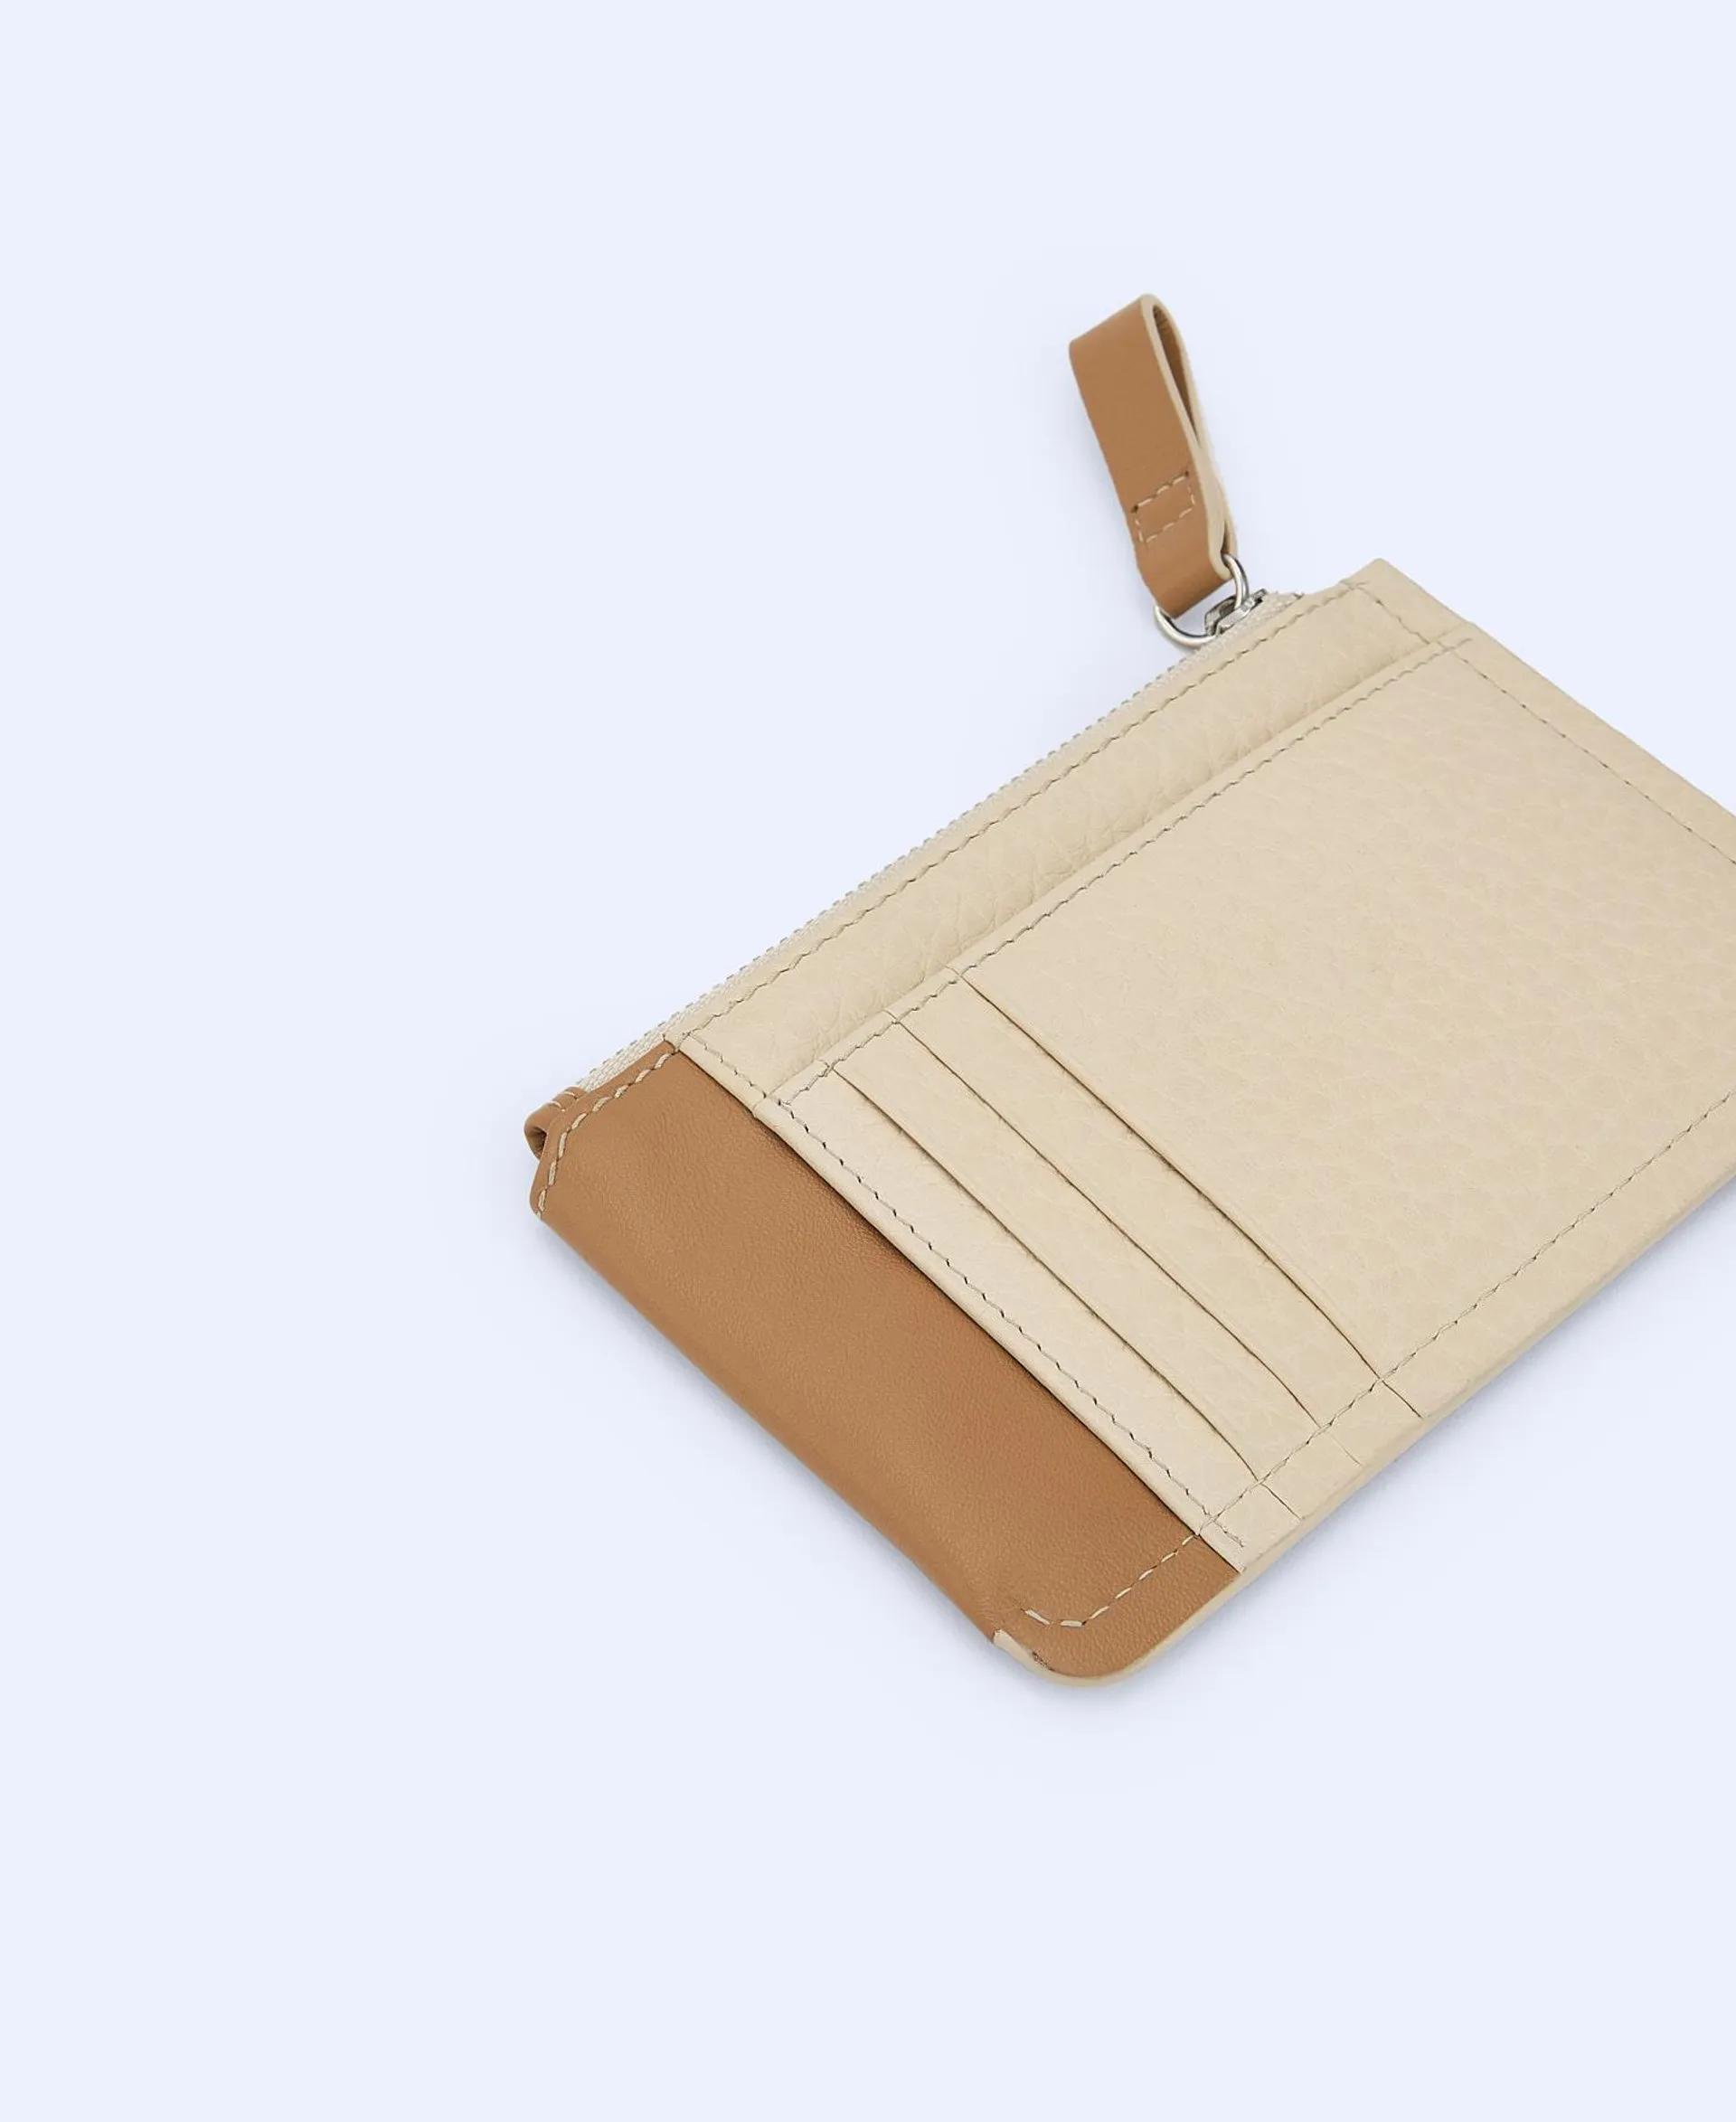 Nappa leather small card holder